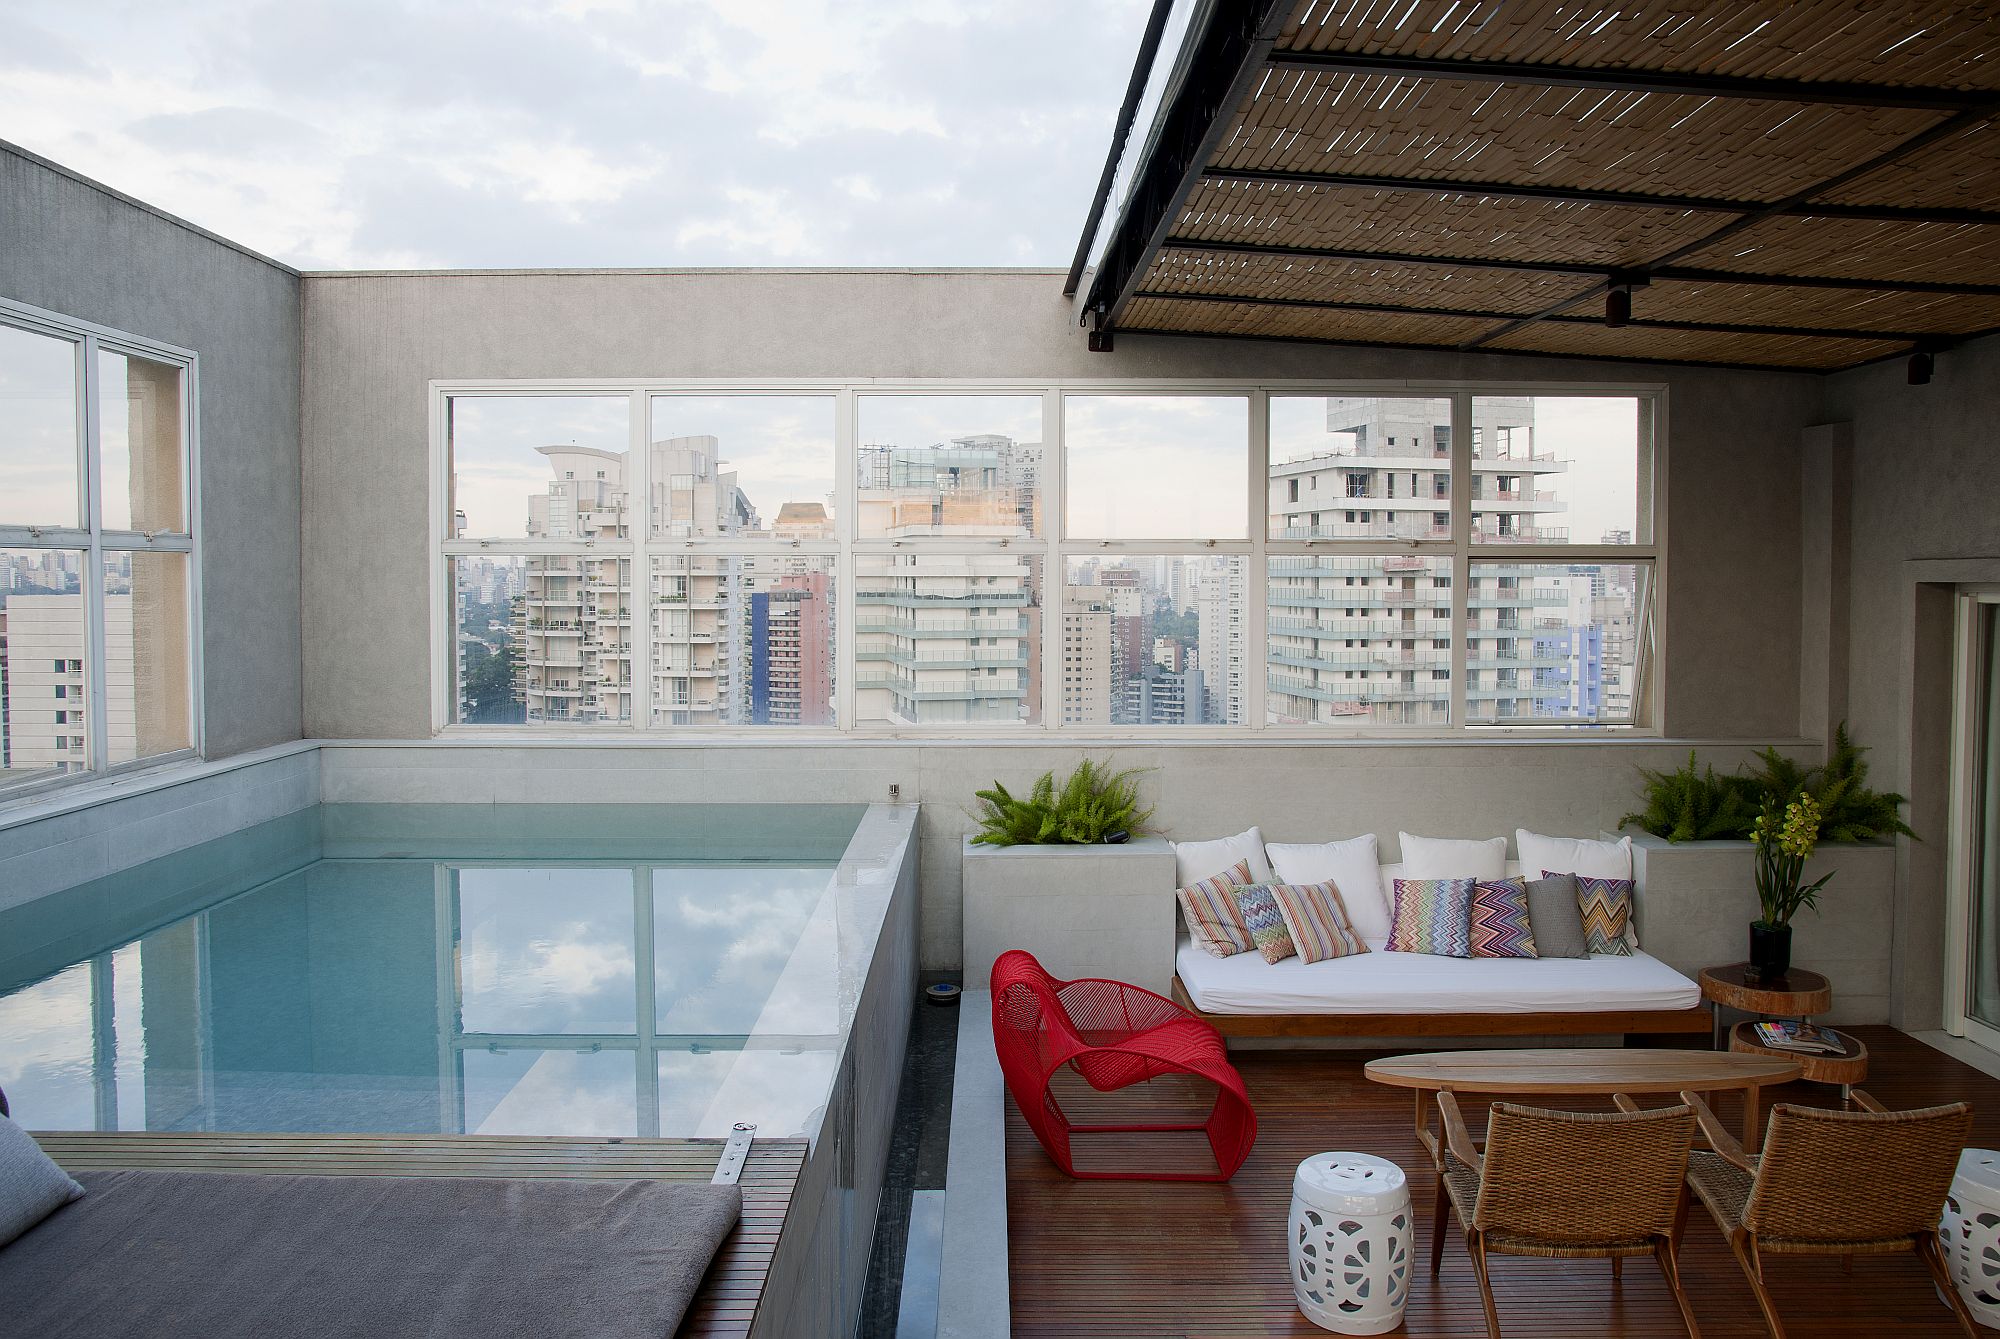 Infinity pool and deck area of the penthouse with view of the cityscape